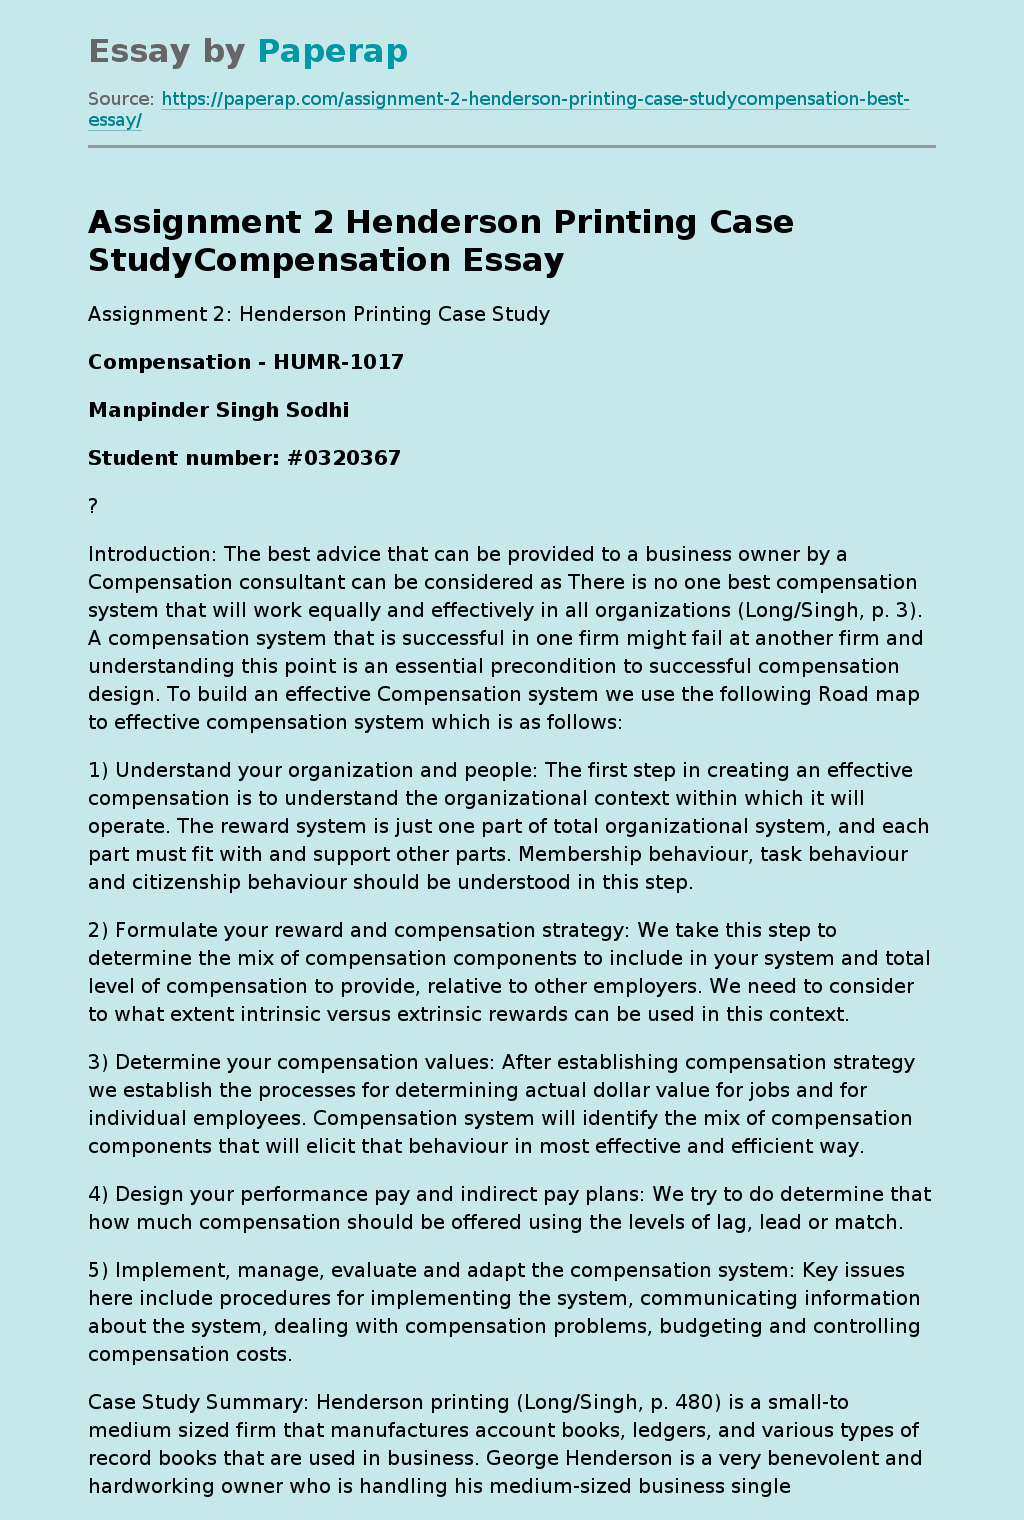 Assignment 2 Henderson Printing Case StudyCompensation